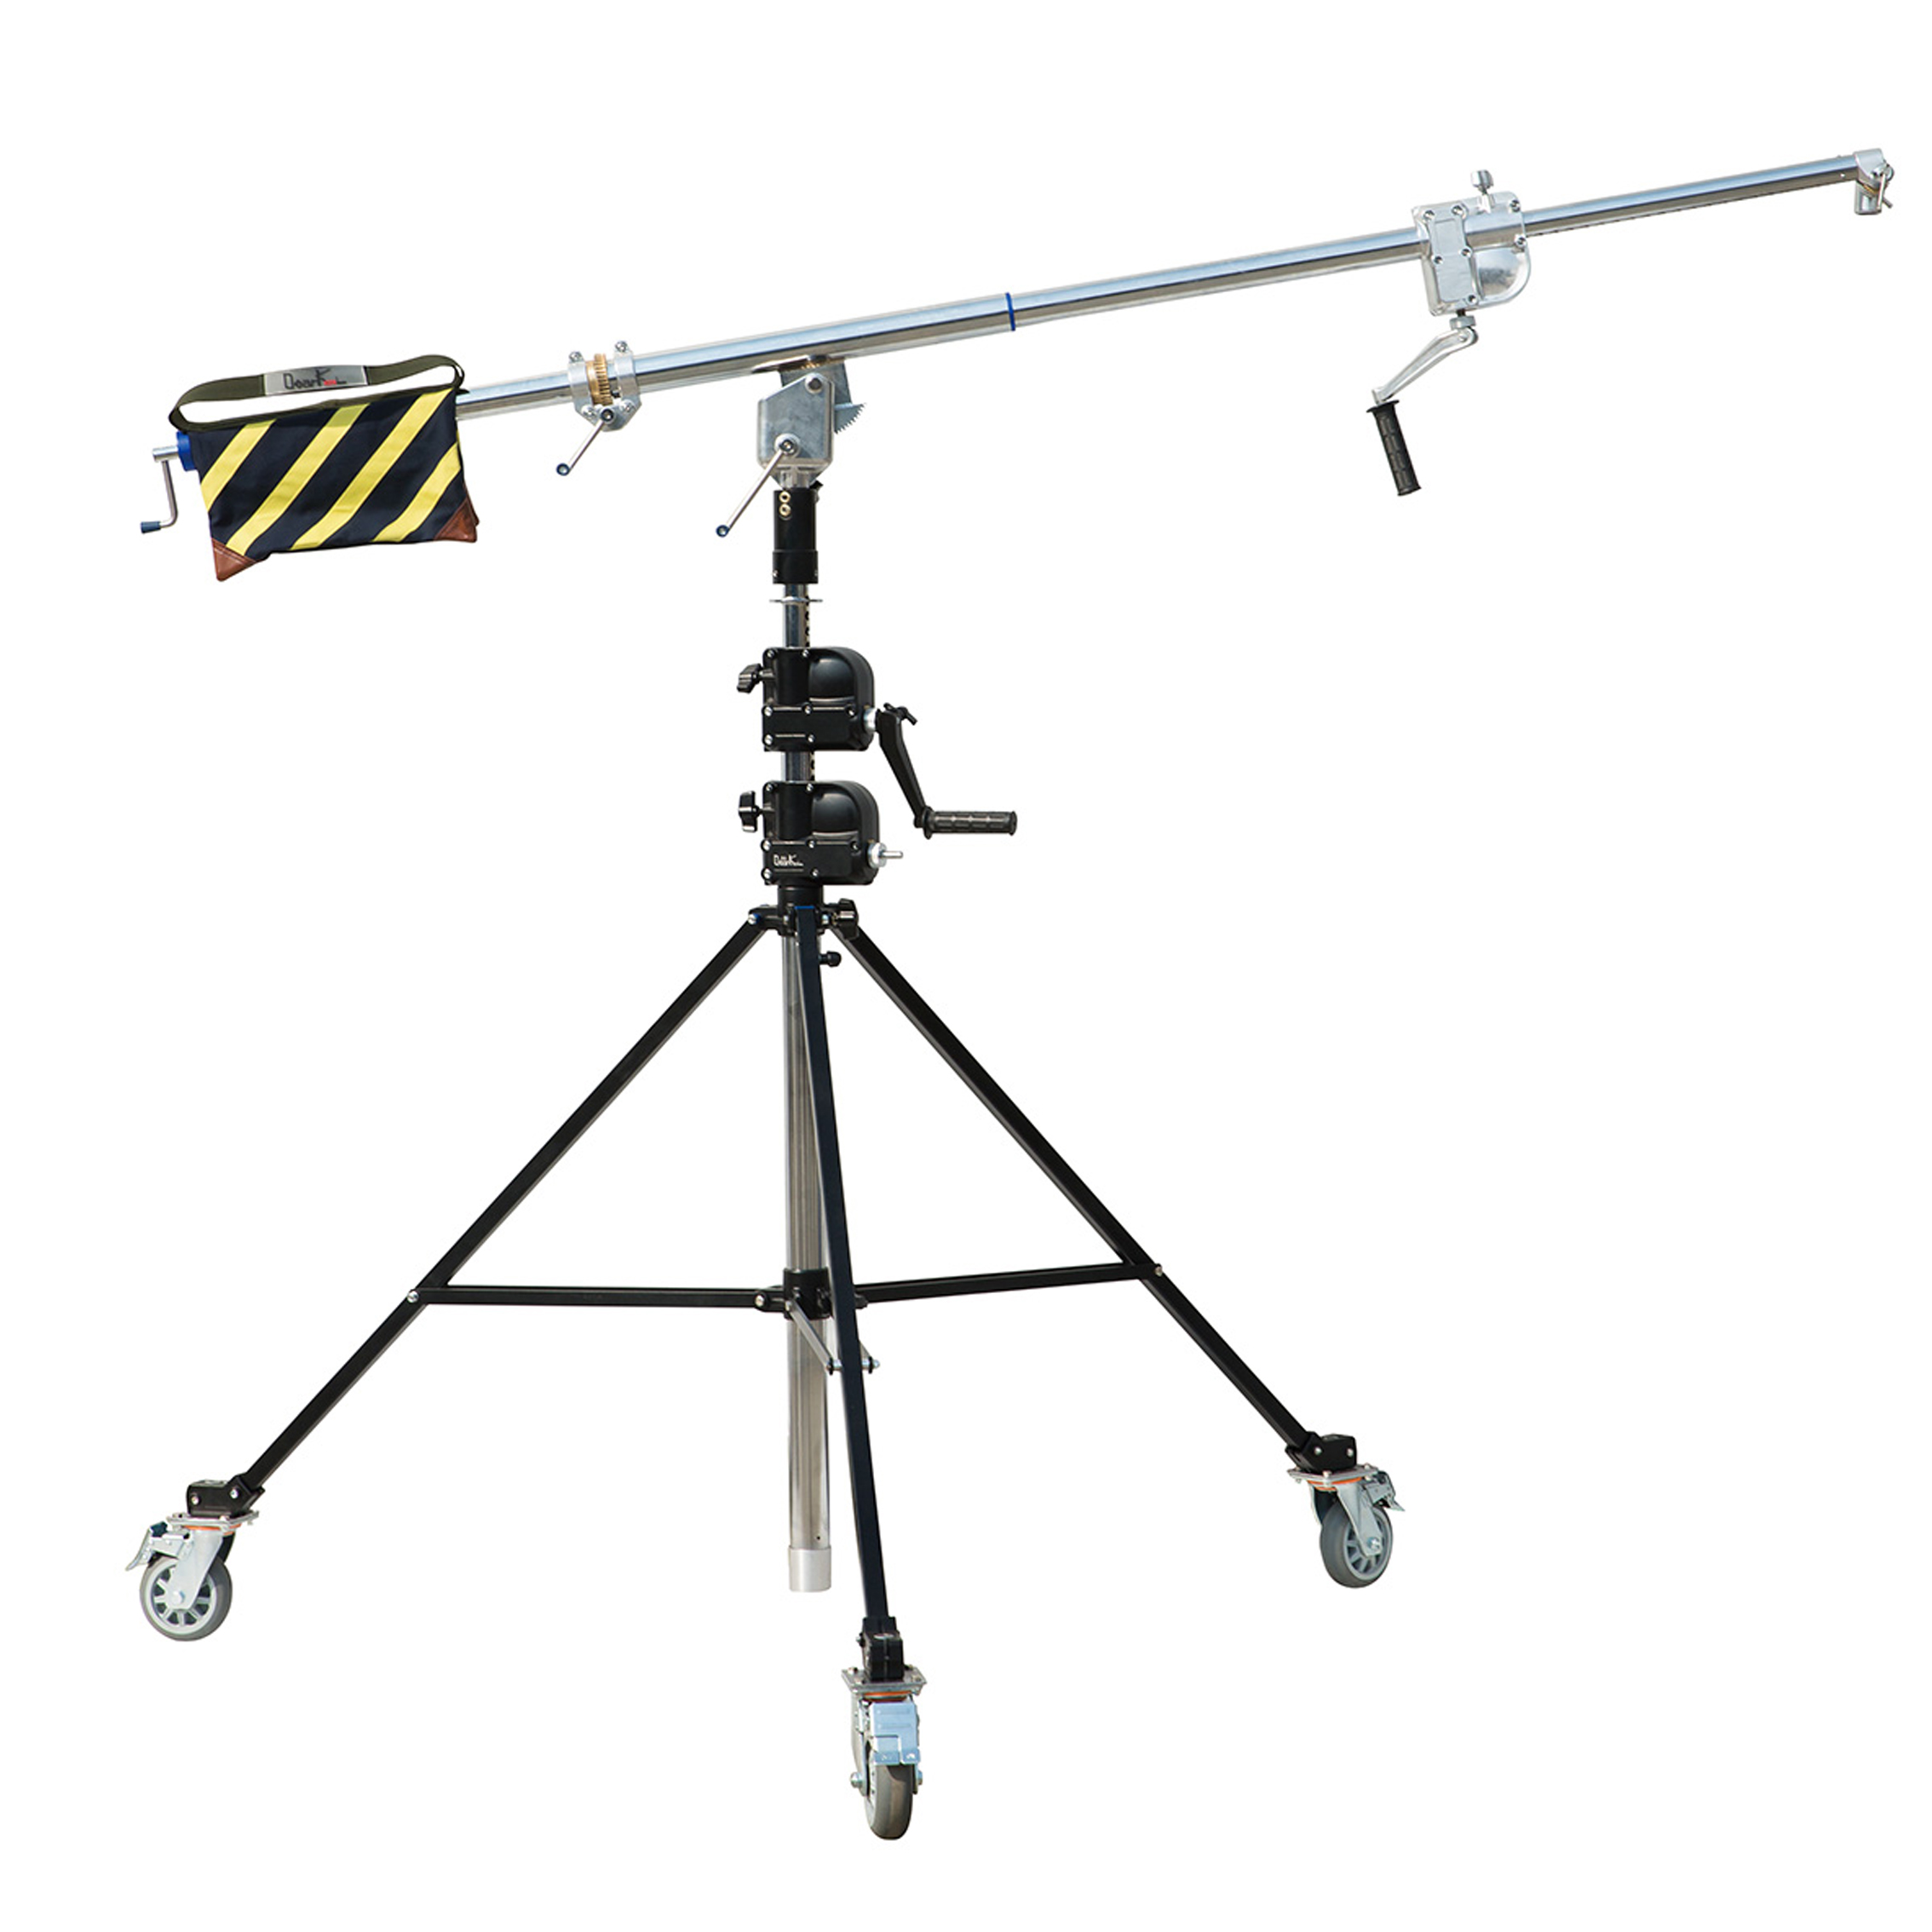 M16-1446FS: 5 SCT Wind Up Stand with Adjustable Boom Arm